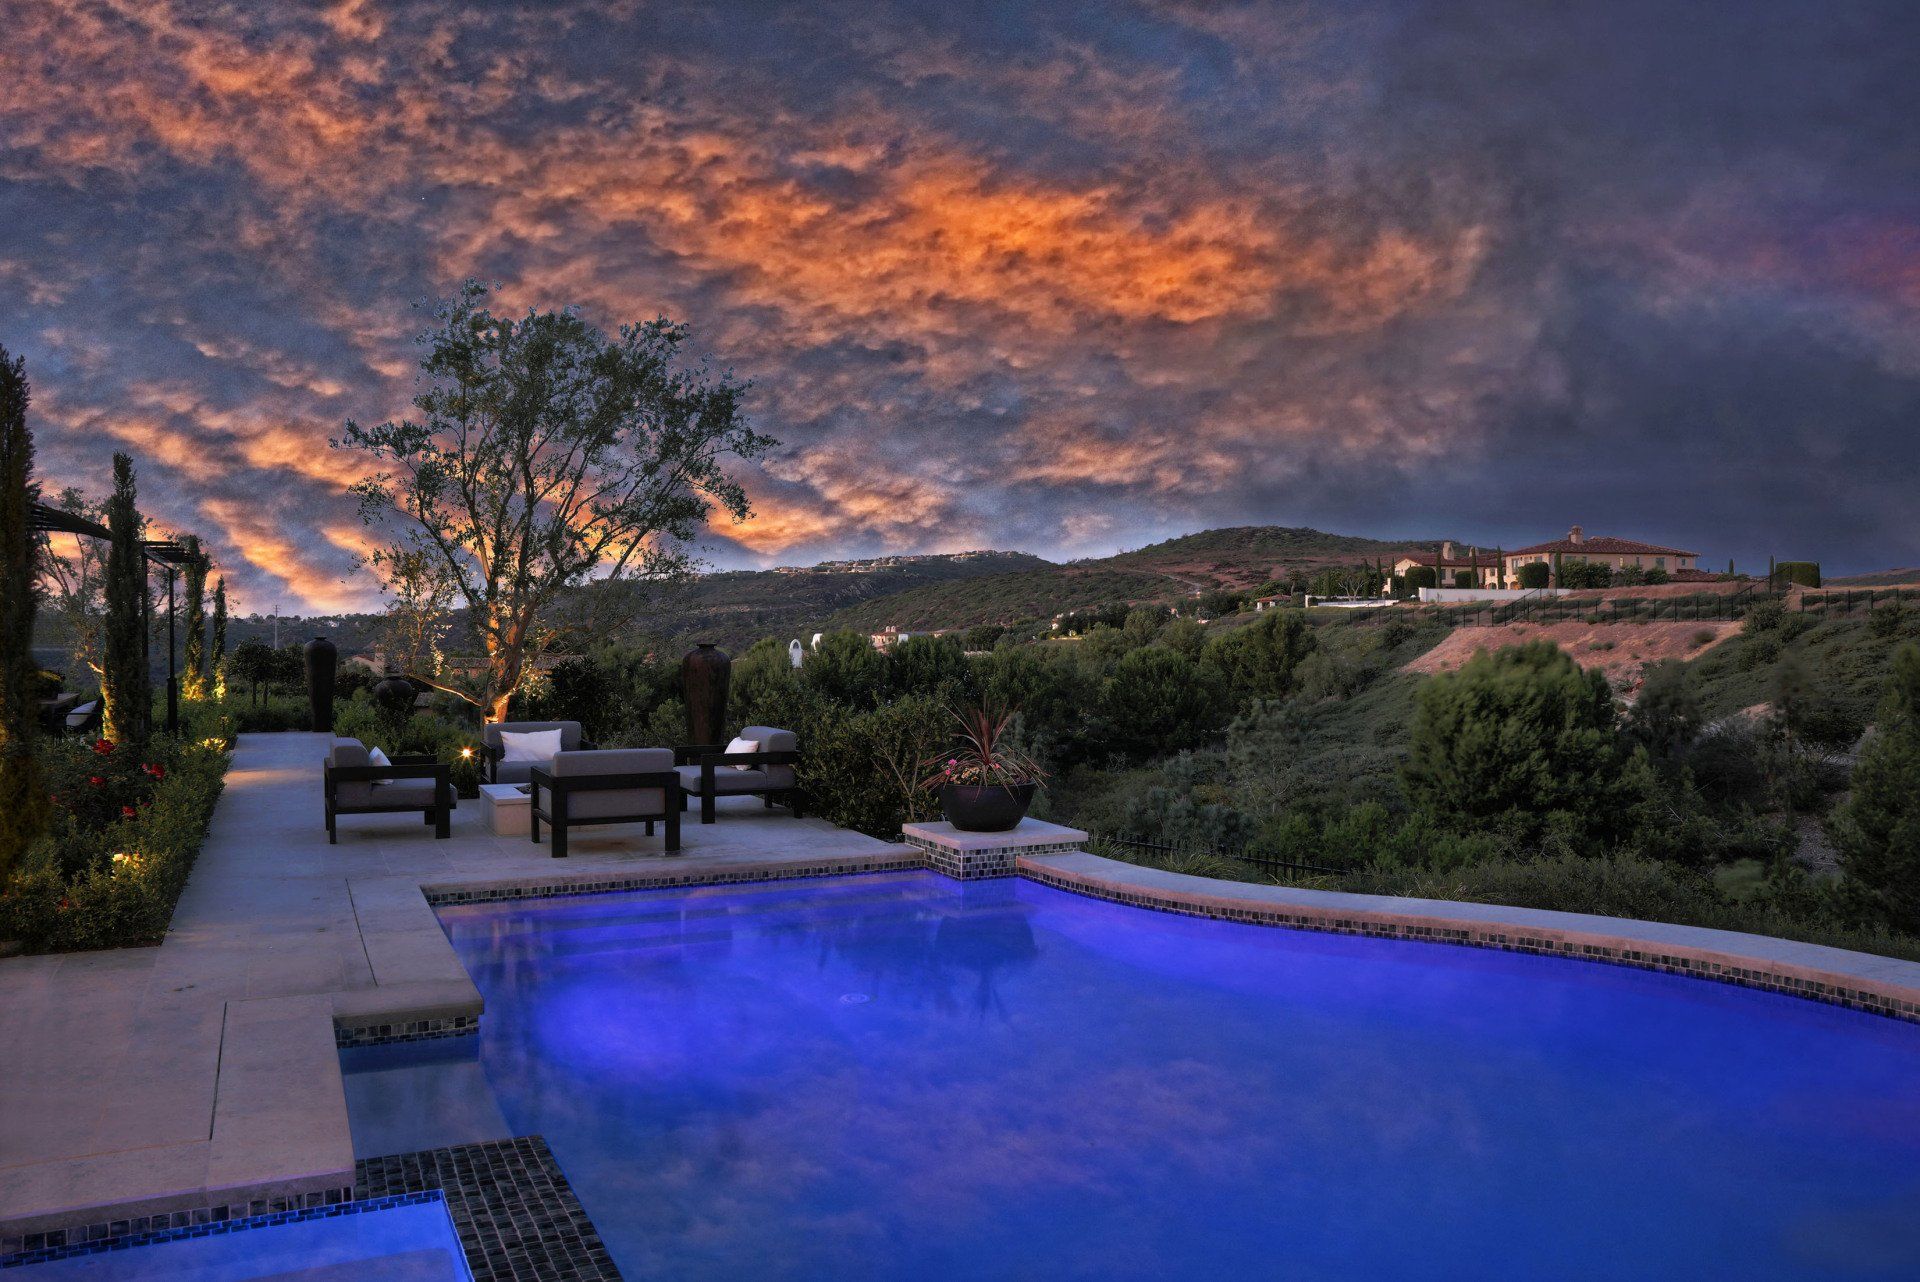 image of the pool at a formal Italian style home in Crystal Cove designed by Oatman Architects